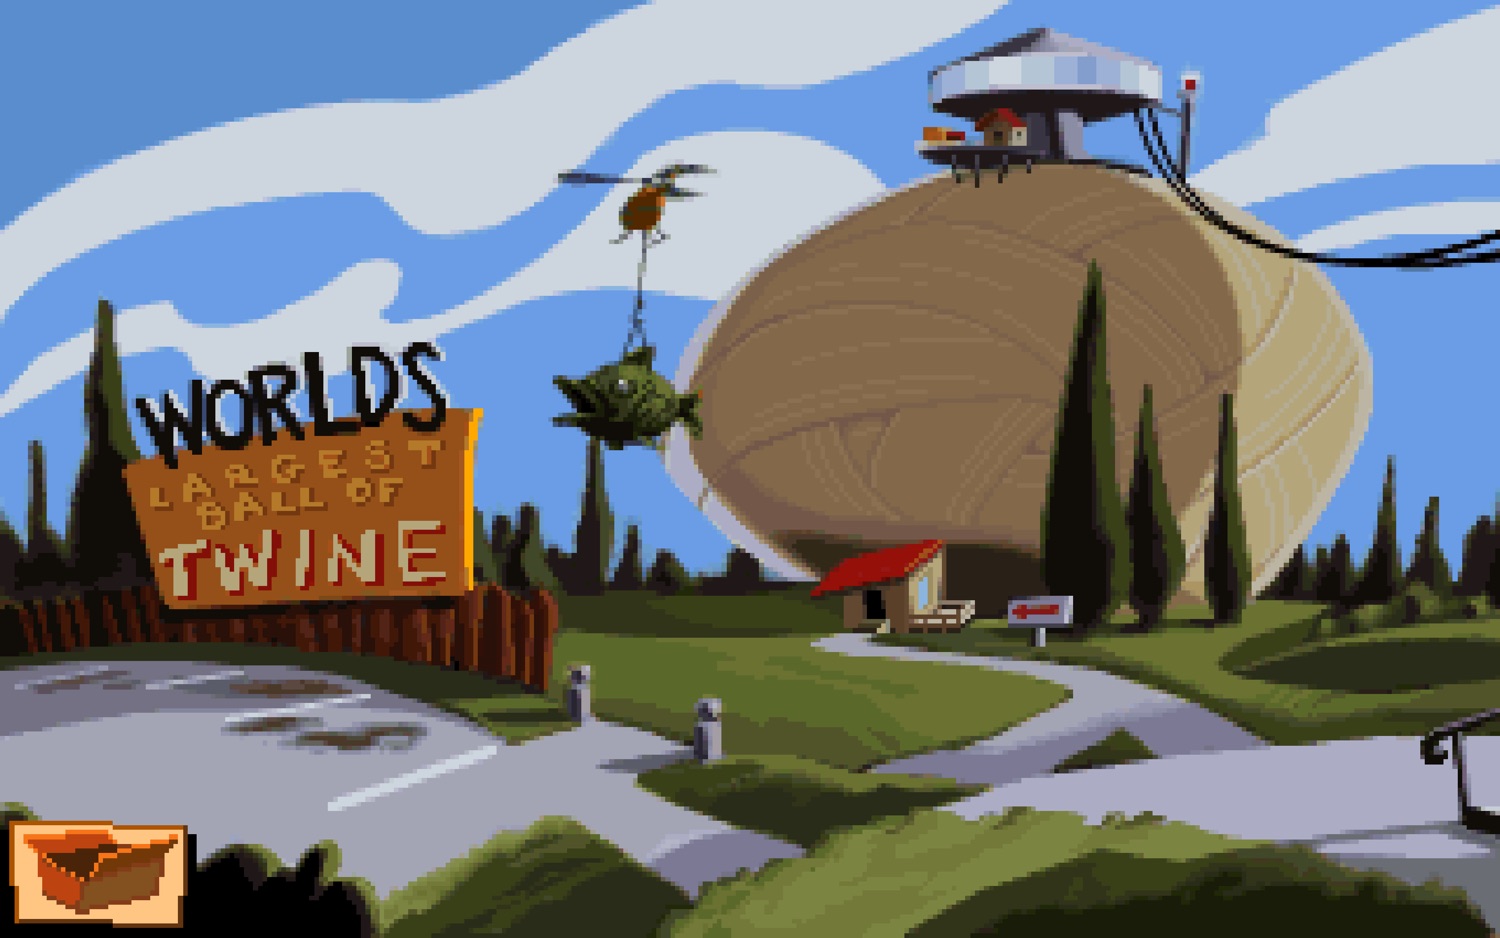 Screenshot of a Giant Ball of Twine with a dirty-looking parking lot next to the sign. There's a helicopter carrying a giant fish on its way up to the observation deck at the top.